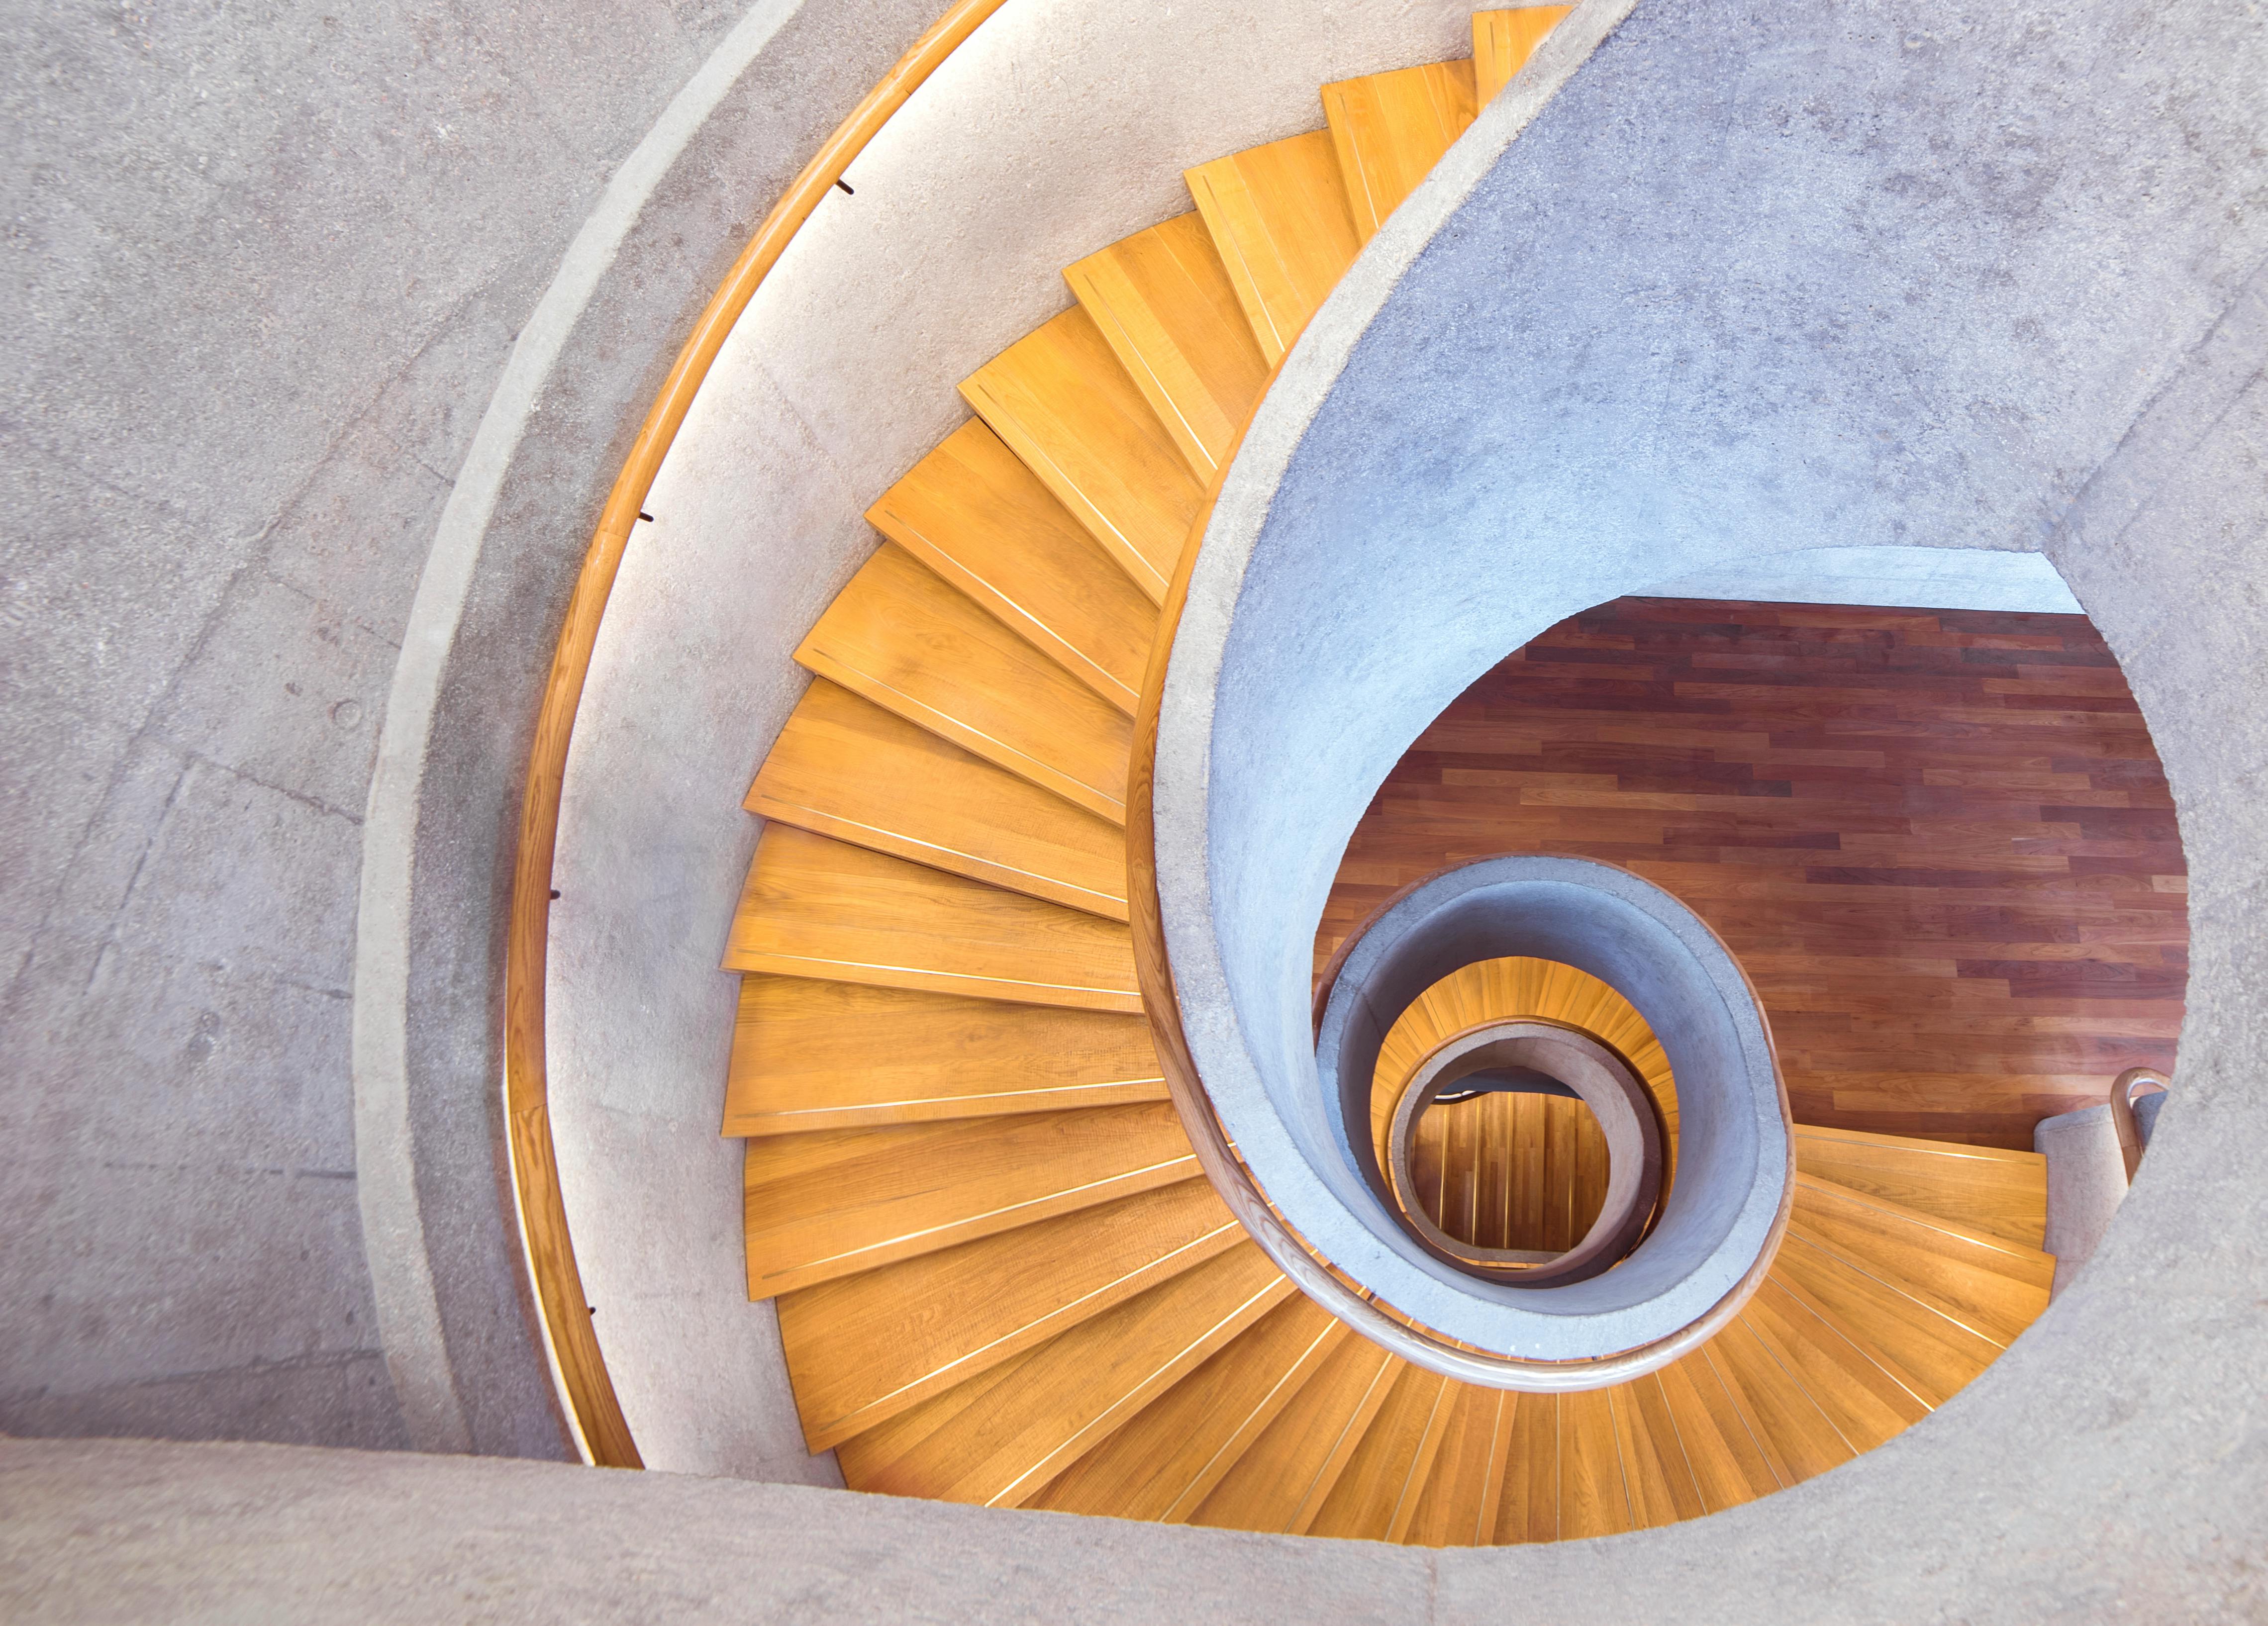 6,000+ Free Spiral Staircase & Stairs Images - Pixabay